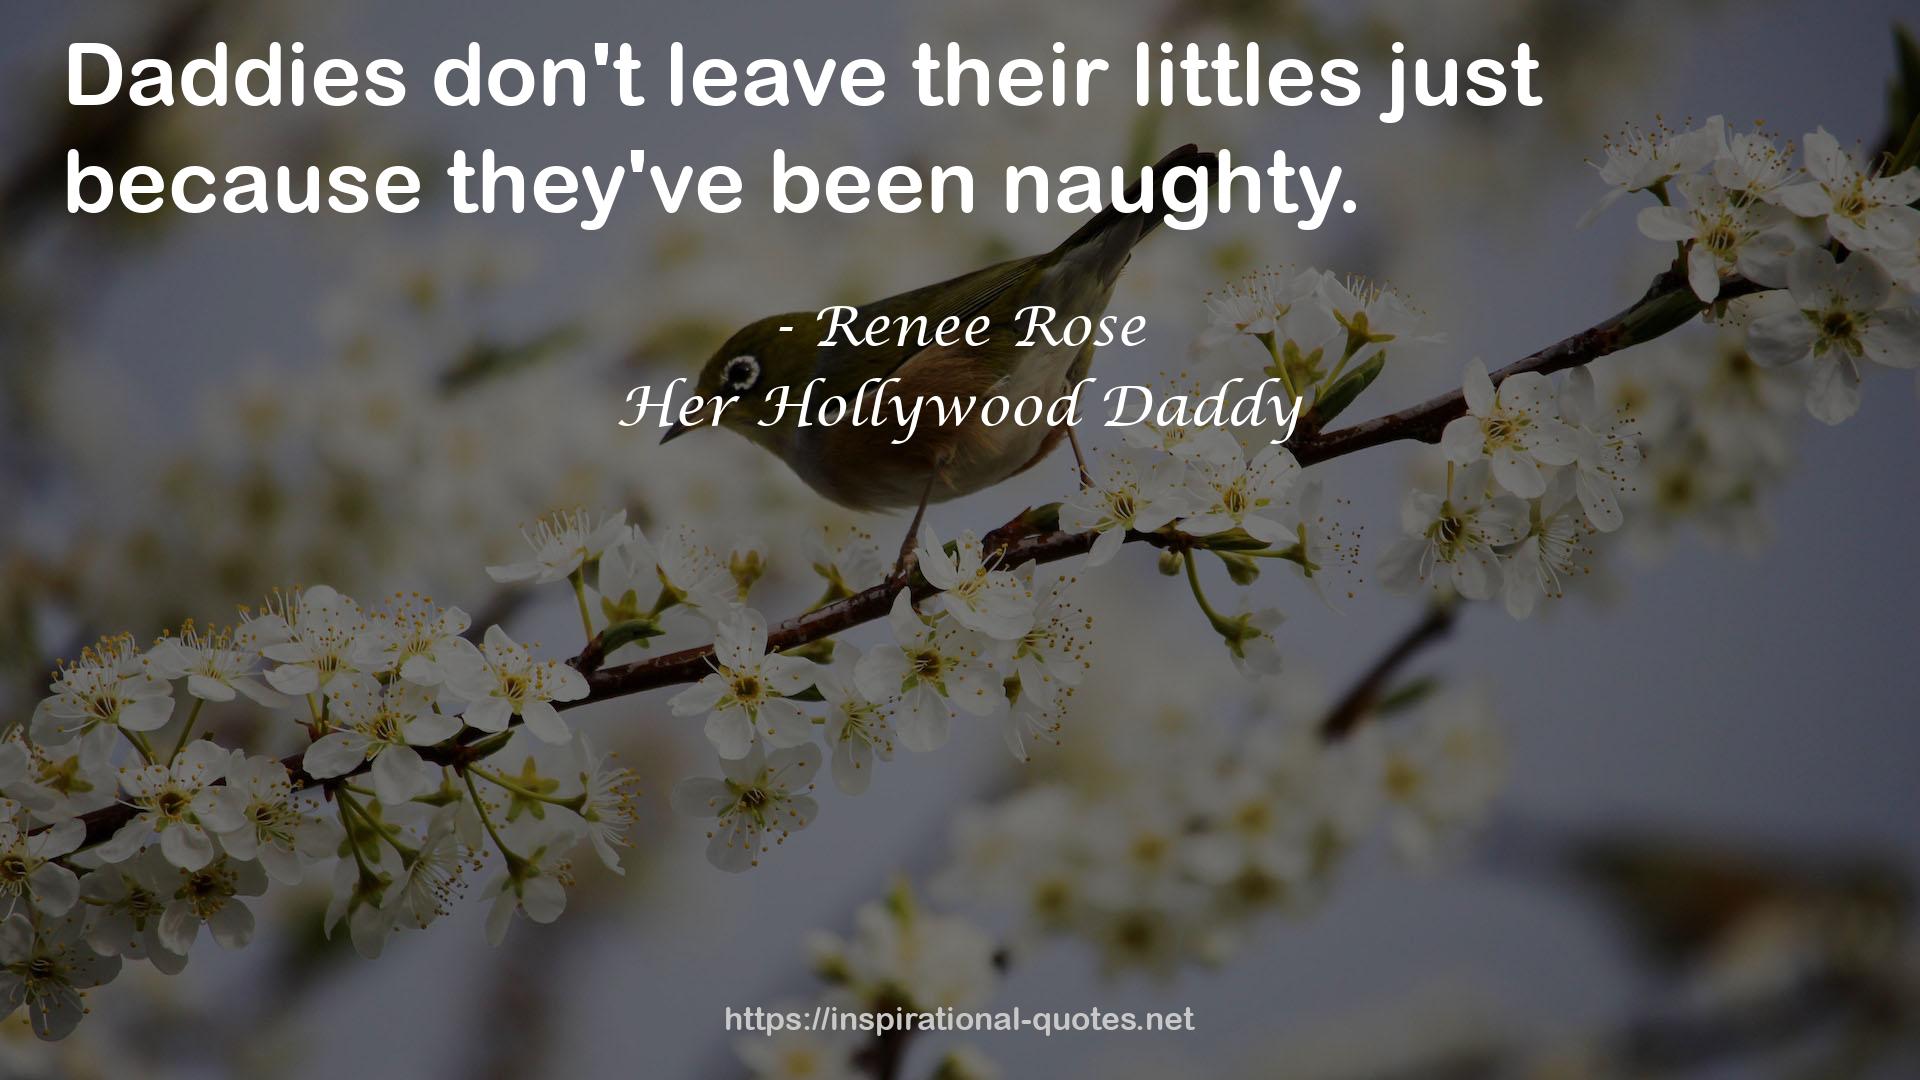 Her Hollywood Daddy QUOTES